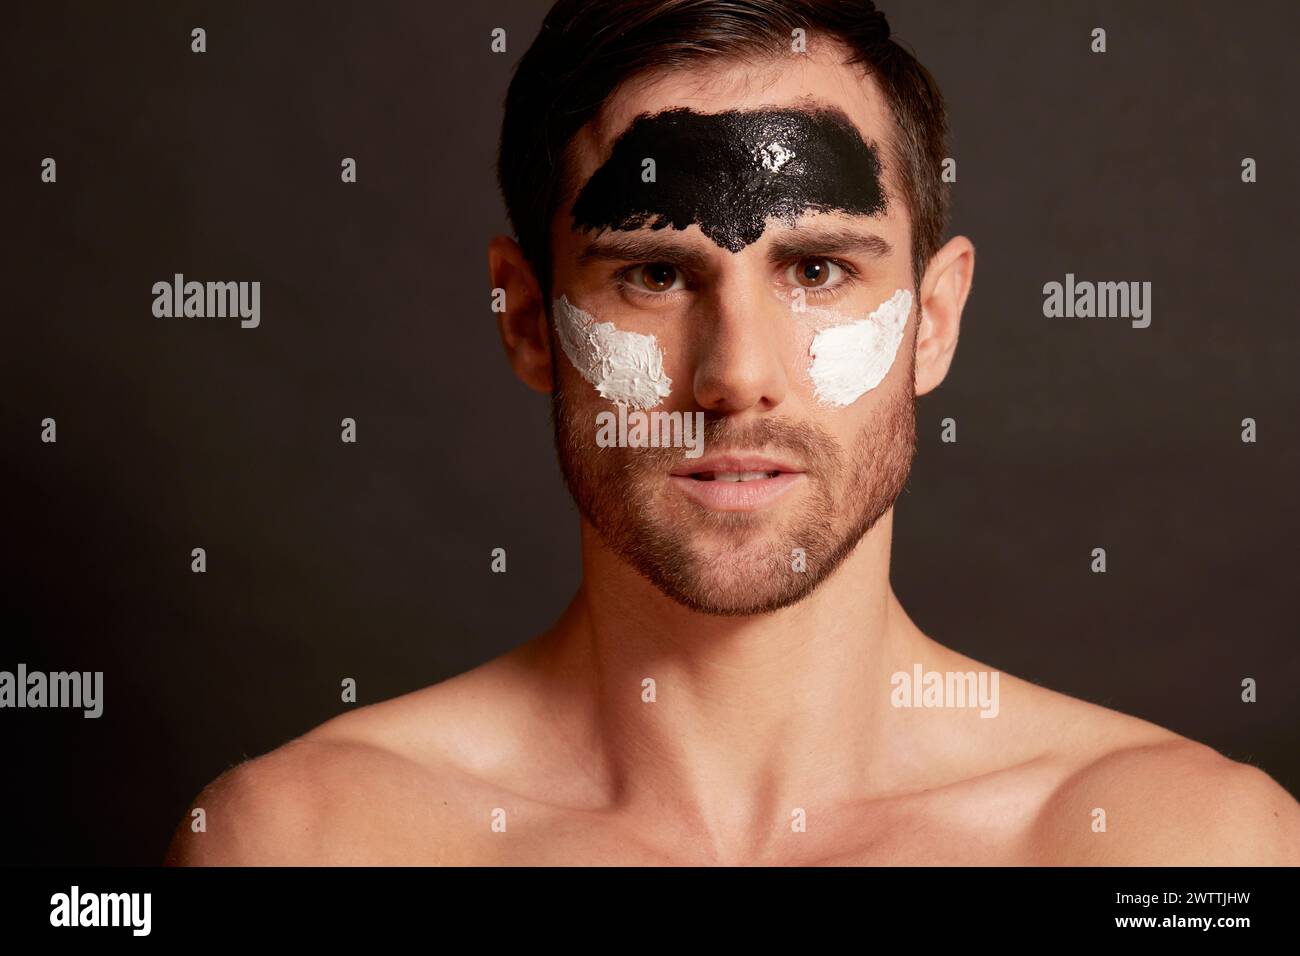 Man with contrasting face paint Stock Photo